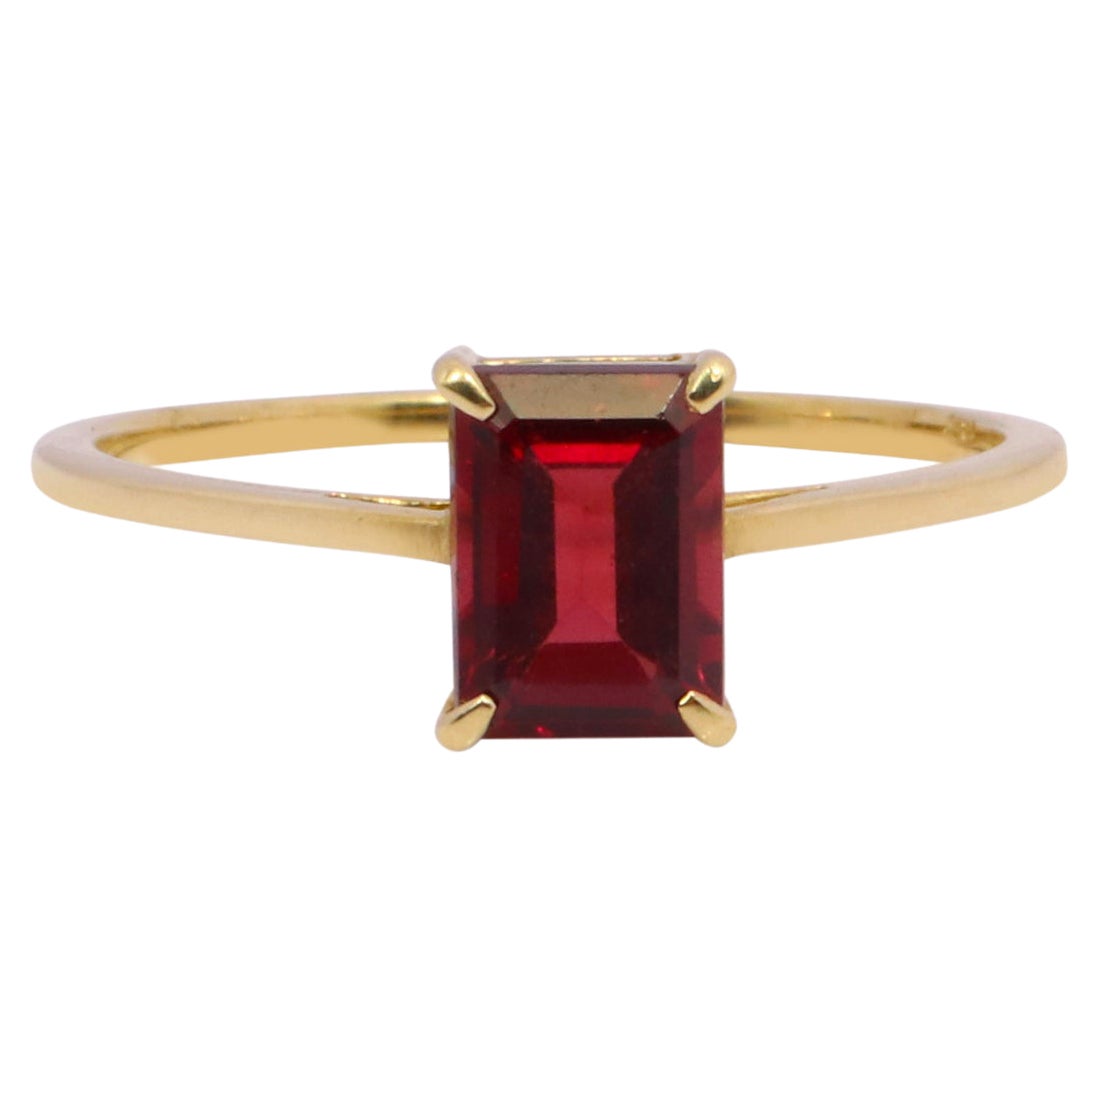 Details about   1.05 ct Emerald Cut 3 stone Red Garnet Modern Statement Ring Solid 14k Pink Gold 